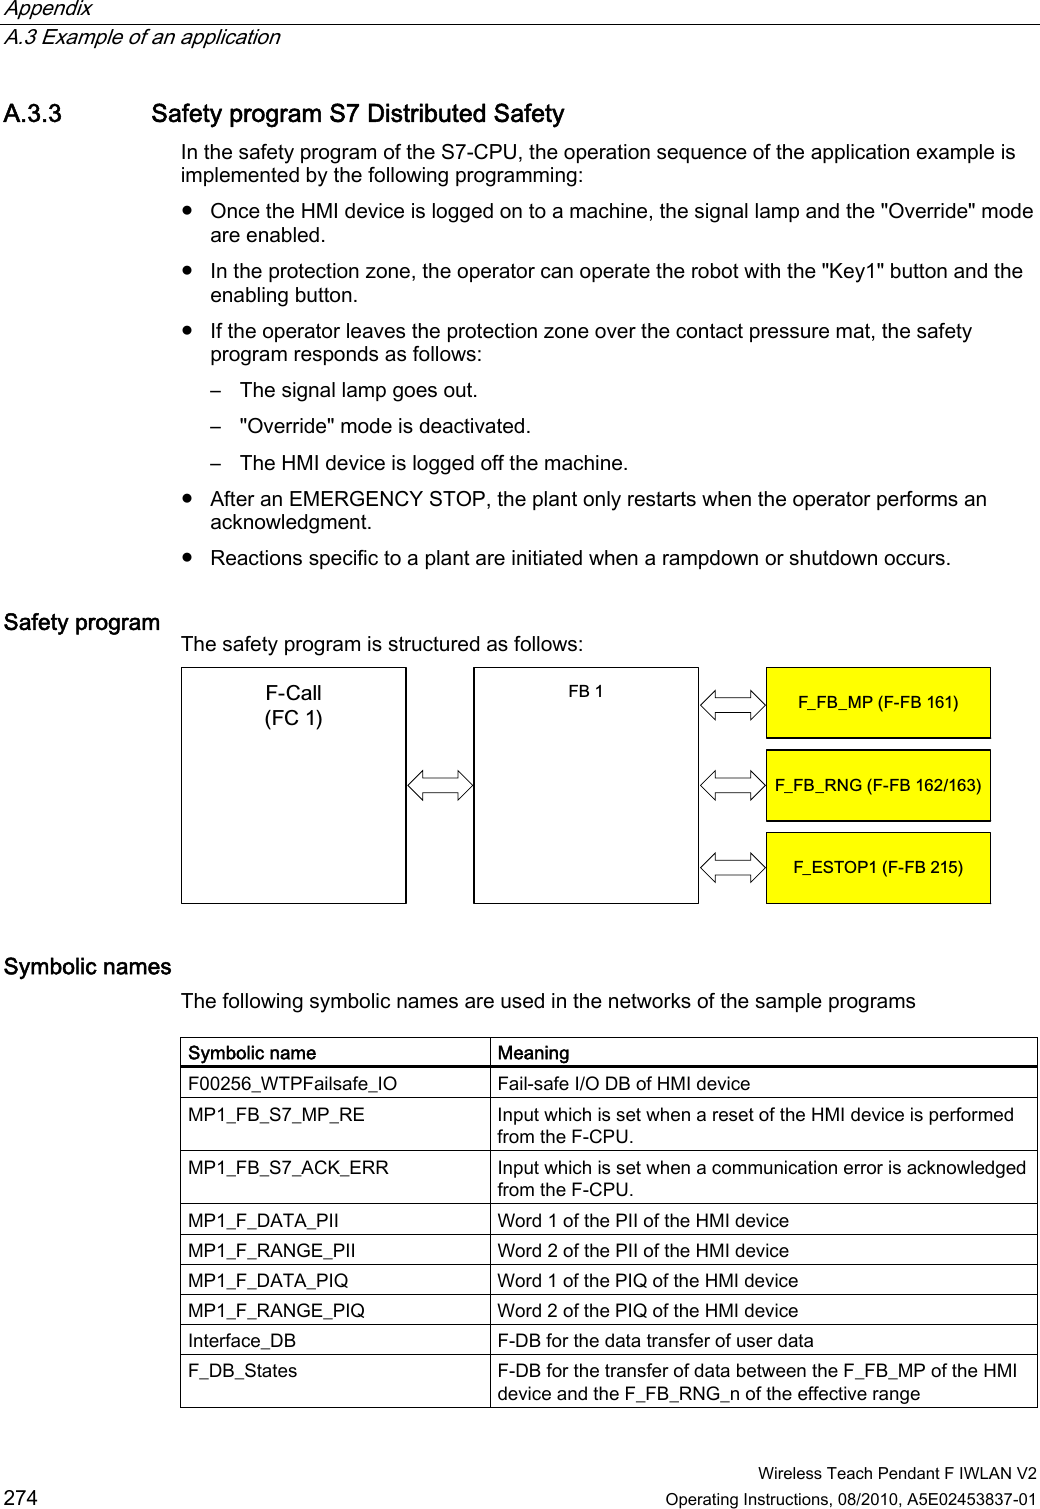 Appendix   A.3 Example of an application  Wireless Teach Pendant F IWLAN V2 274 Operating Instructions, 08/2010, A5E02453837-01 A.3.3 Safety program S7 Distributed Safety In the safety program of the S7-CPU, the operation sequence of the application example is implemented by the following programming:  ●  Once the HMI device is logged on to a machine, the signal lamp and the &quot;Override&quot; mode are enabled. ●  In the protection zone, the operator can operate the robot with the &quot;Key1&quot; button and the enabling button. ●  If the operator leaves the protection zone over the contact pressure mat, the safety program responds as follows: –  The signal lamp goes out. –  &quot;Override&quot; mode is deactivated. –  The HMI device is logged off the machine. ●  After an EMERGENCY STOP, the plant only restarts when the operator performs an acknowledgment. ●  Reactions specific to a plant are initiated when a rampdown or shutdown occurs. Safety program  The safety program is structured as follows: )% )B)%B03))%)B)%B51*))%)B(6723))%)&amp;DOO)&amp; Symbolic names The following symbolic names are used in the networks of the sample programs  Symbolic name  Meaning F00256_WTPFailsafe_IO  Fail-safe I/O DB of HMI device MP1_FB_S7_MP_RE  Input which is set when a reset of the HMI device is performed from the F-CPU. MP1_FB_S7_ACK_ERR  Input which is set when a communication error is acknowledged from the F-CPU. MP1_F_DATA_PII  Word 1 of the PII of the HMI device MP1_F_RANGE_PII  Word 2 of the PII of the HMI device MP1_F_DATA_PIQ  Word 1 of the PIQ of the HMI device MP1_F_RANGE_PIQ  Word 2 of the PIQ of the HMI device Interface_DB  F-DB for the data transfer of user data F_DB_States  F-DB for the transfer of data between the F_FB_MP of the HMI device and the F_FB_RNG_n of the effective range PRELIMINARY II 1.7.2010